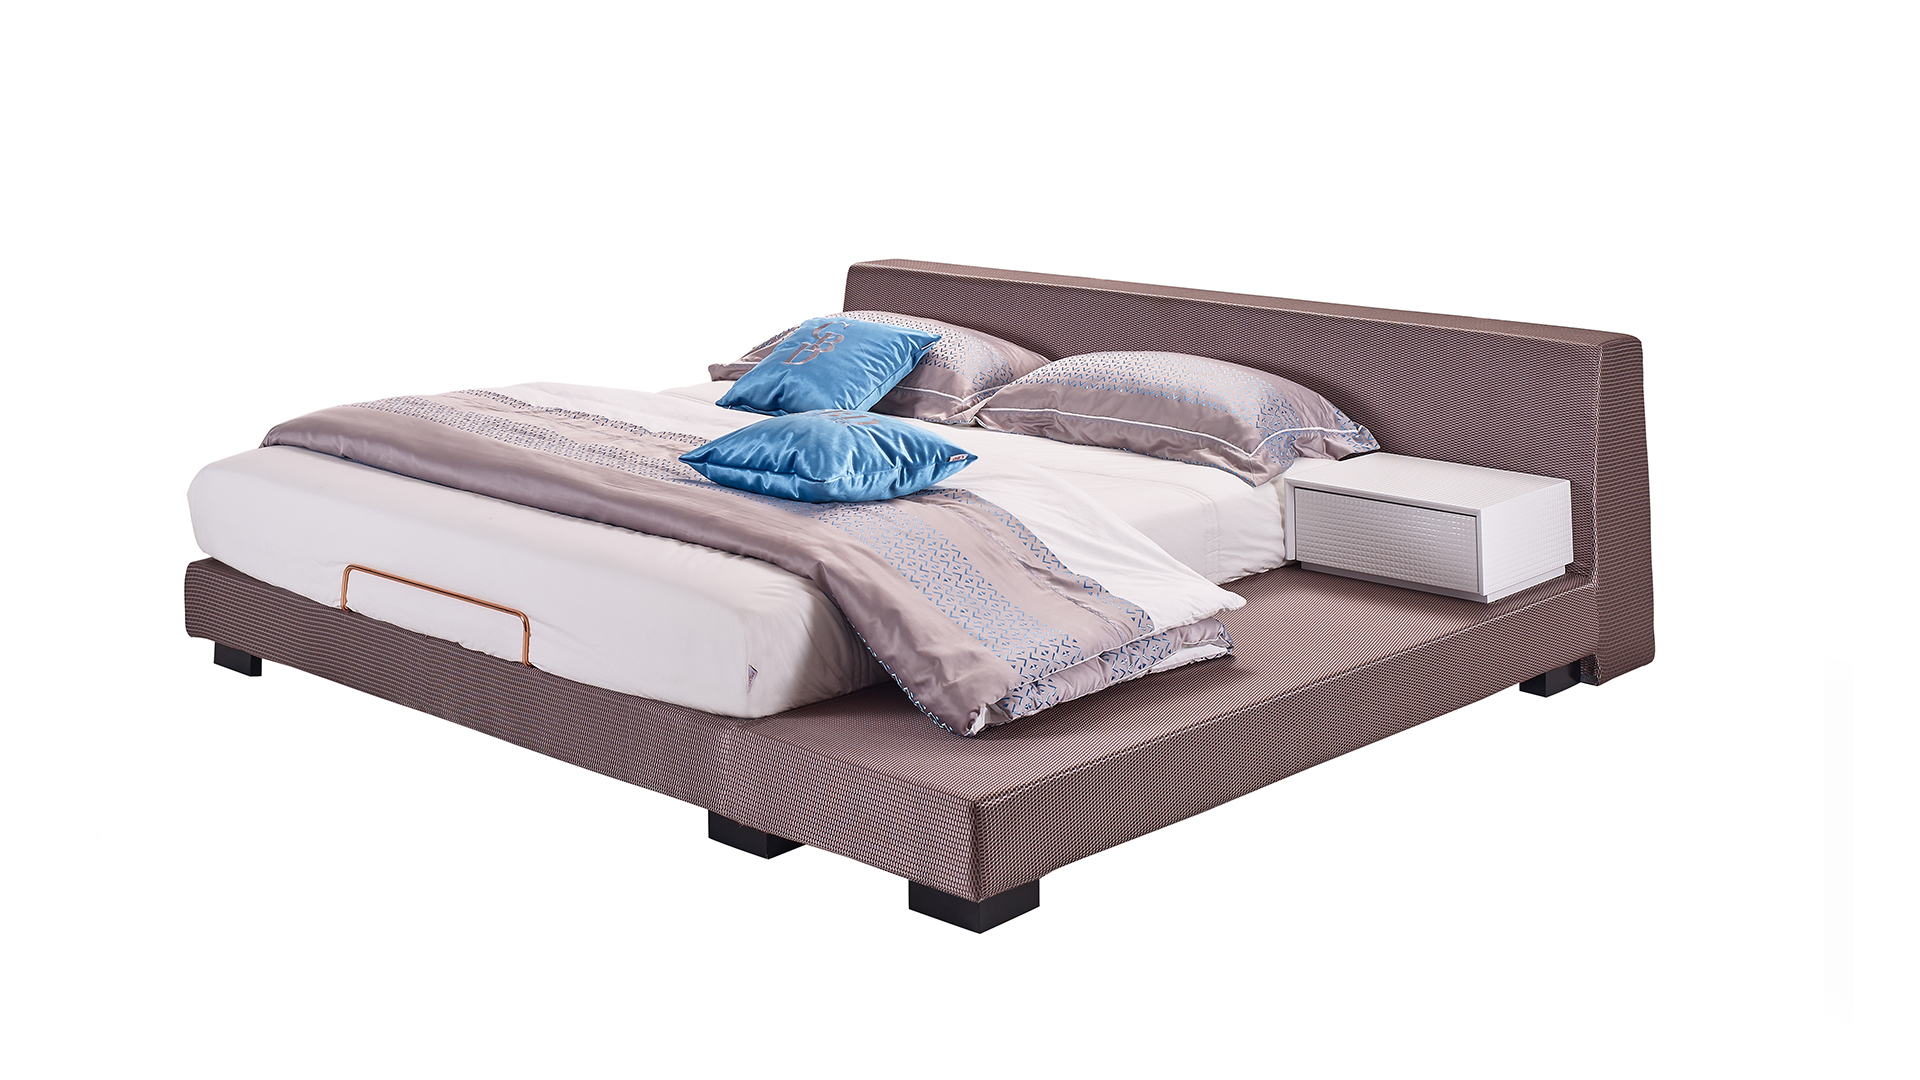 <p><strong>description：</strong></p><p>*bedframe with the 3D slats or motion</p><p>*the tatami design makes your life so fine;</p><p>*If there are kids at home,it will be very convinient for them to go to the bed.The side table is removeable.If it is moved to the headboard, it will be a bedside table.Also,you can use it for working table.The design is very reasonable and make your house so fashionable.</p><p><br/></p>